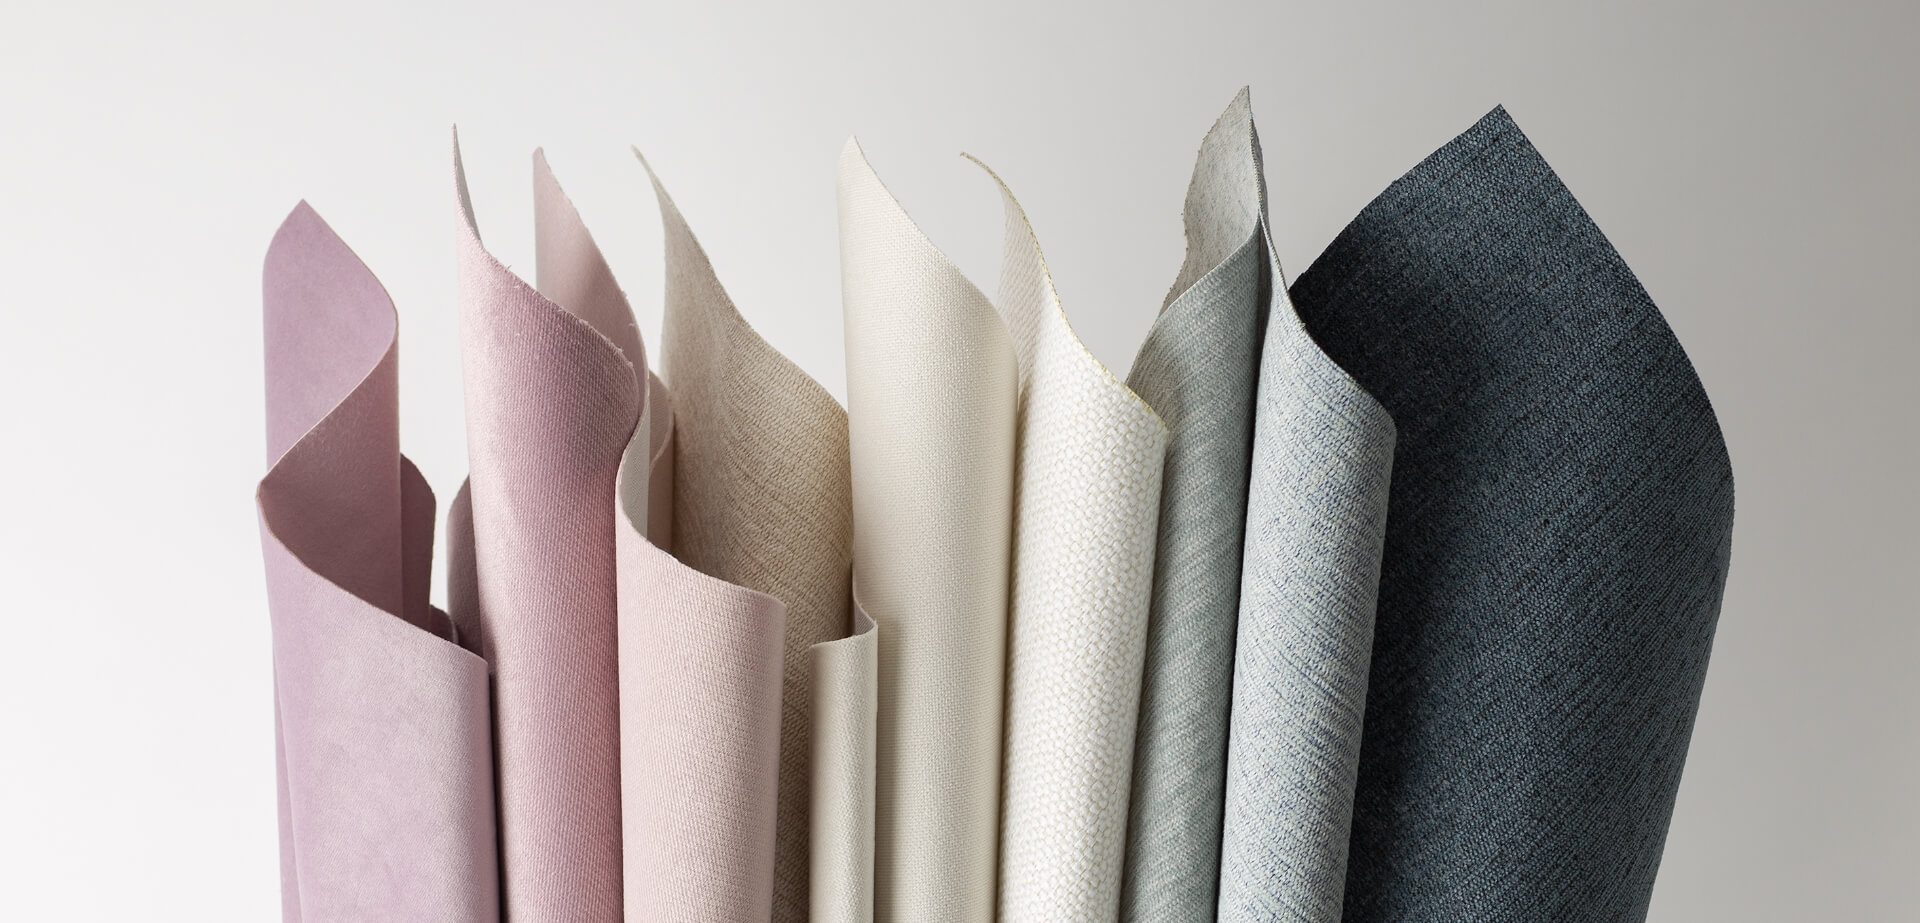 7611HORTON – the new collection of upholstery fabrics